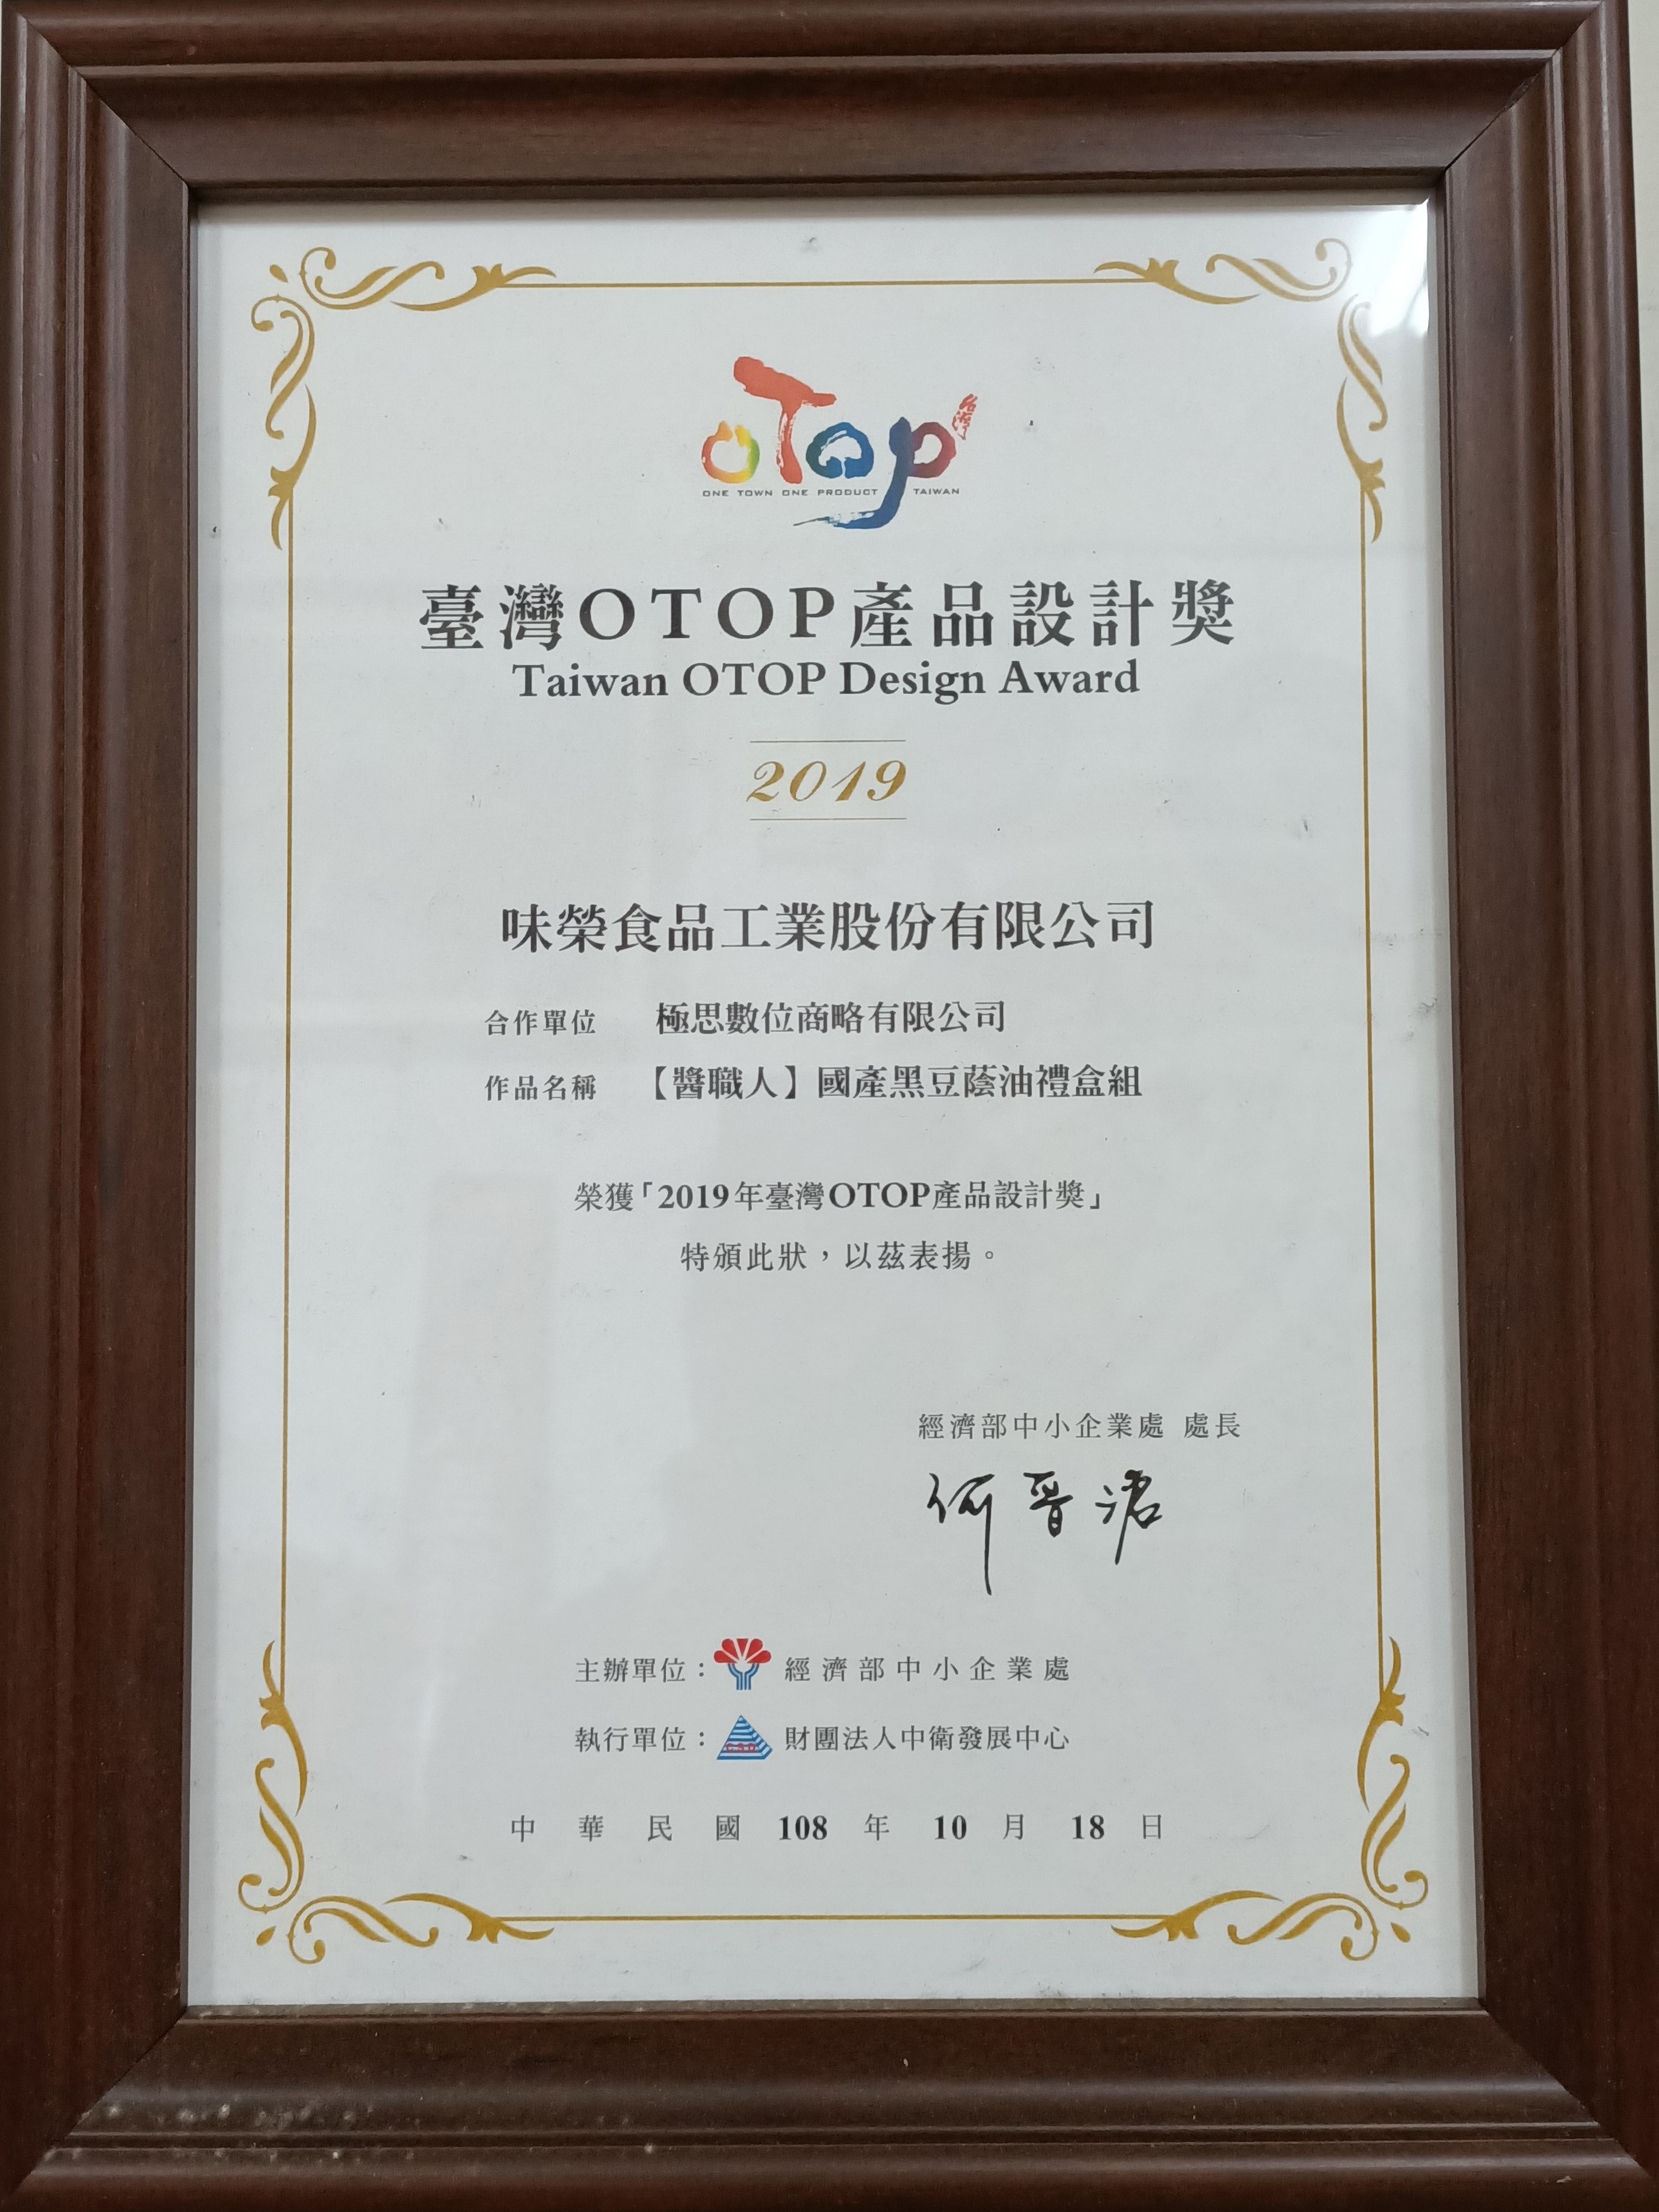 [Jiangshiren-Domestic Black Bean Oil Gift Box Set] won the 13th Taiwan OTOP Product Design Award from the "Ministry of Economic Affairs' Small and Medium Enterprises Division"